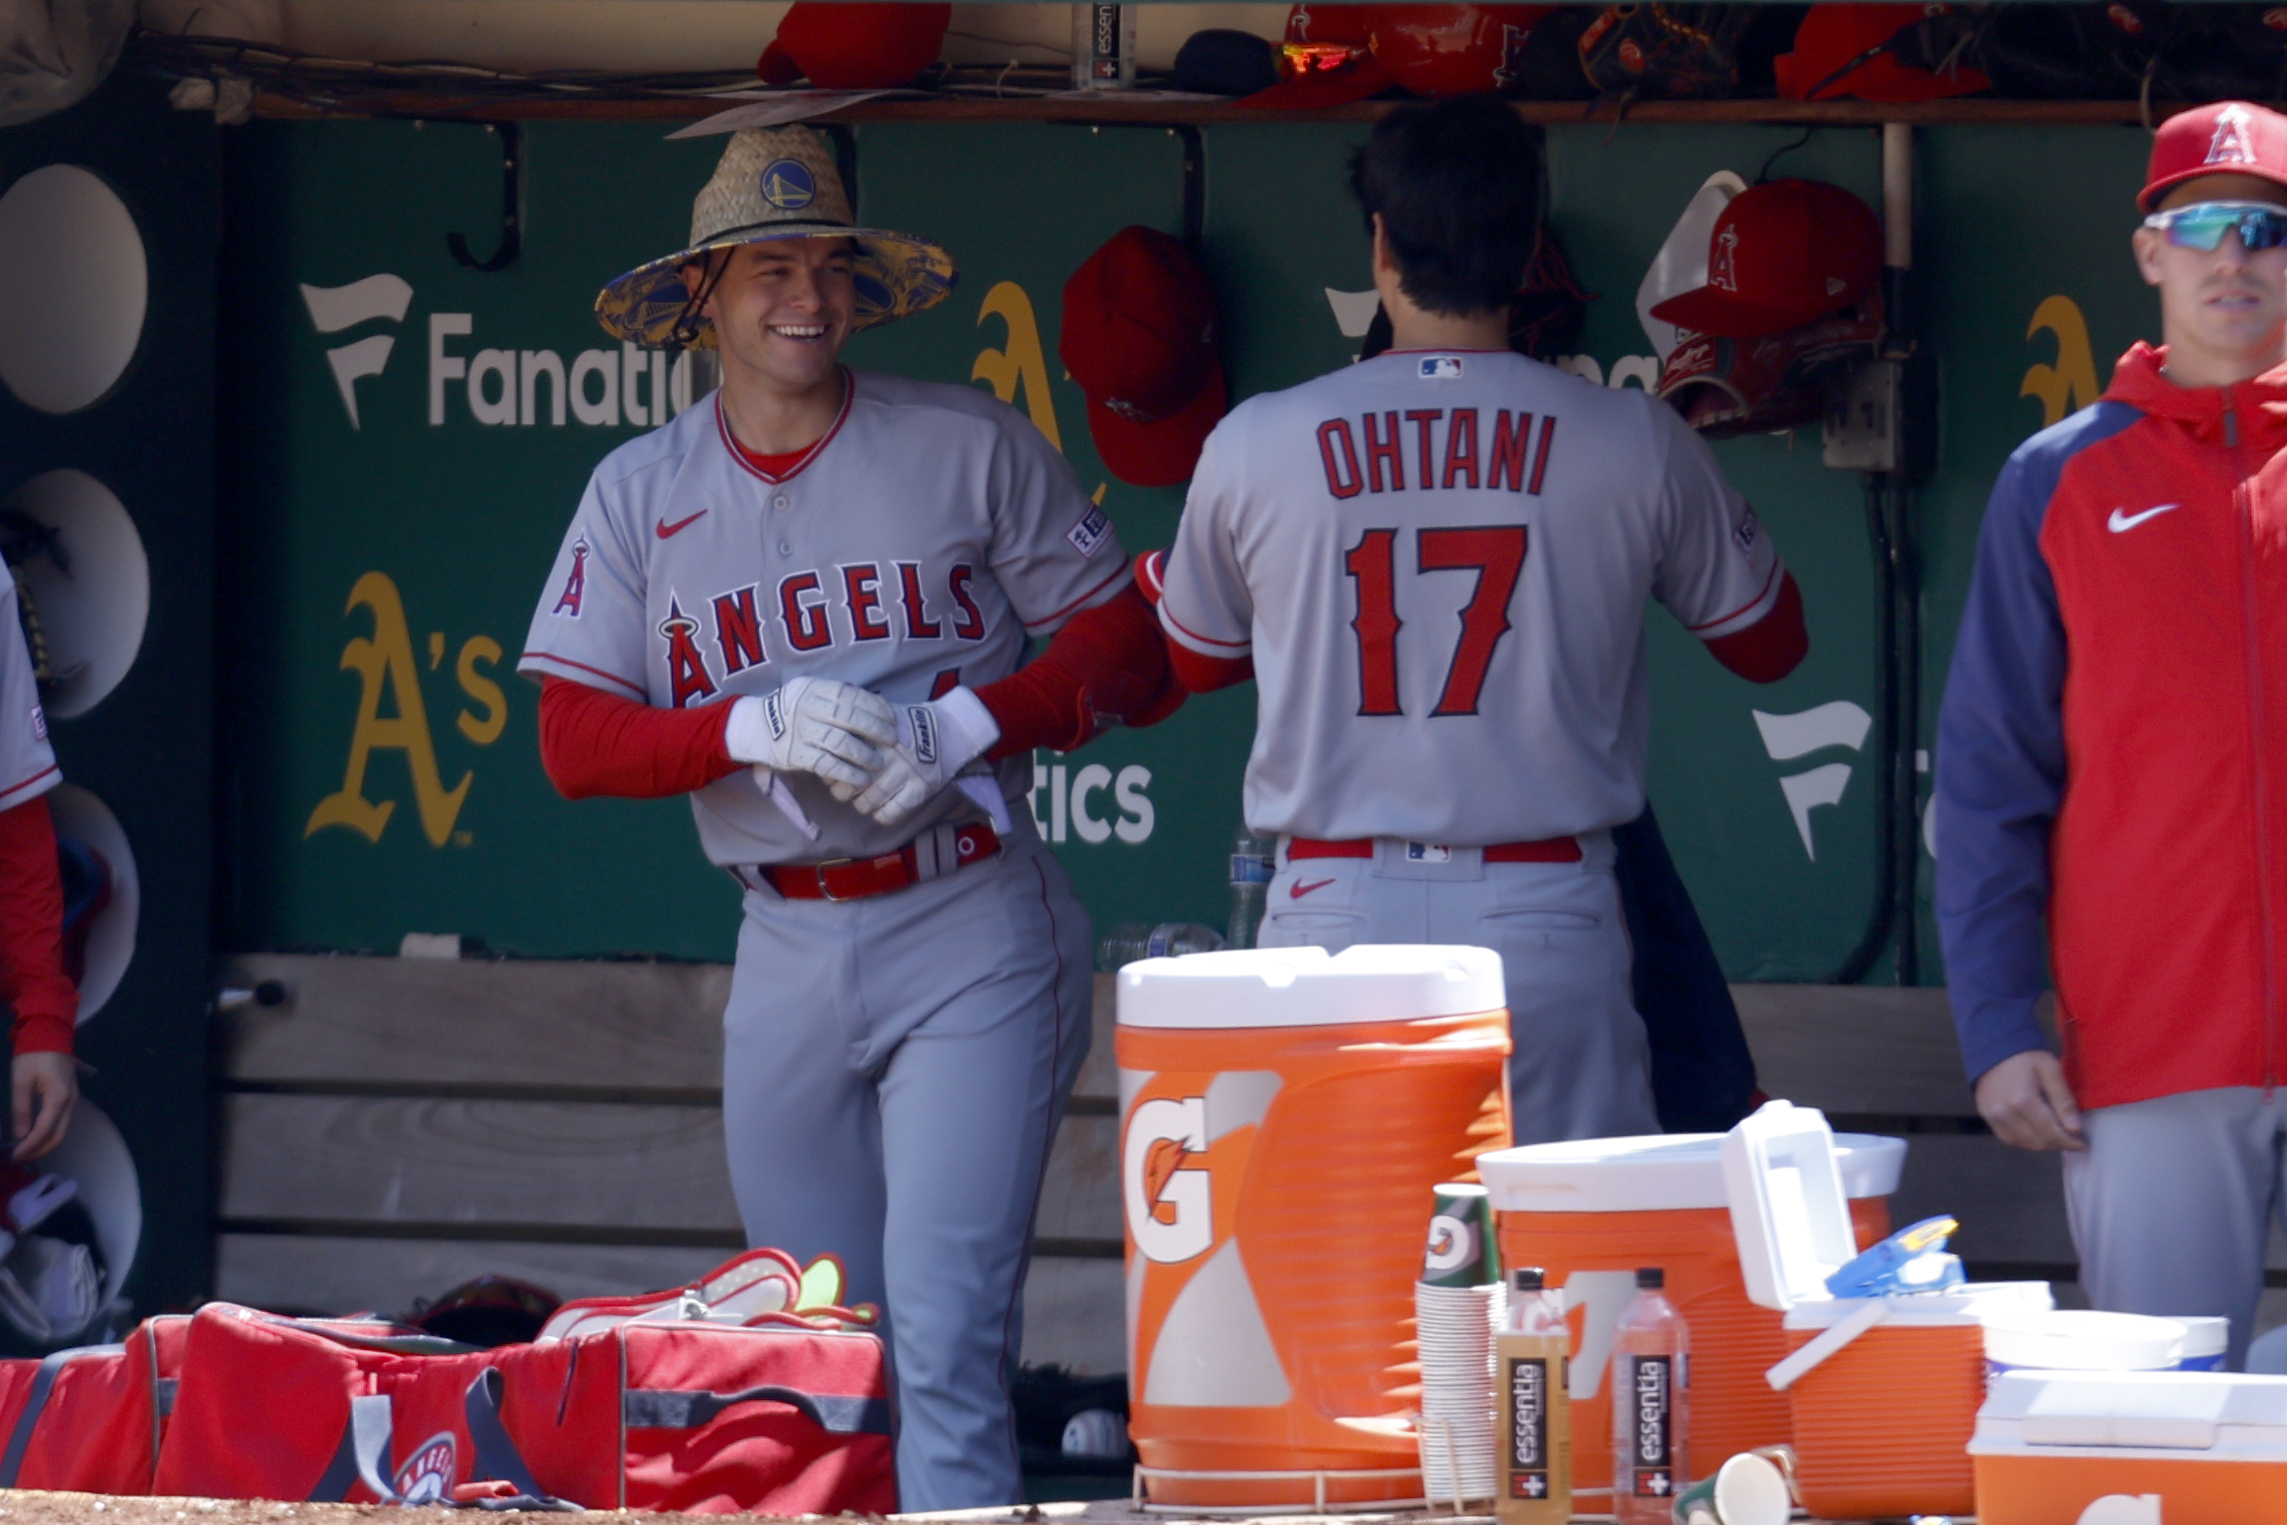 This time around, Shohei Ohtani got the job done, and the Angels